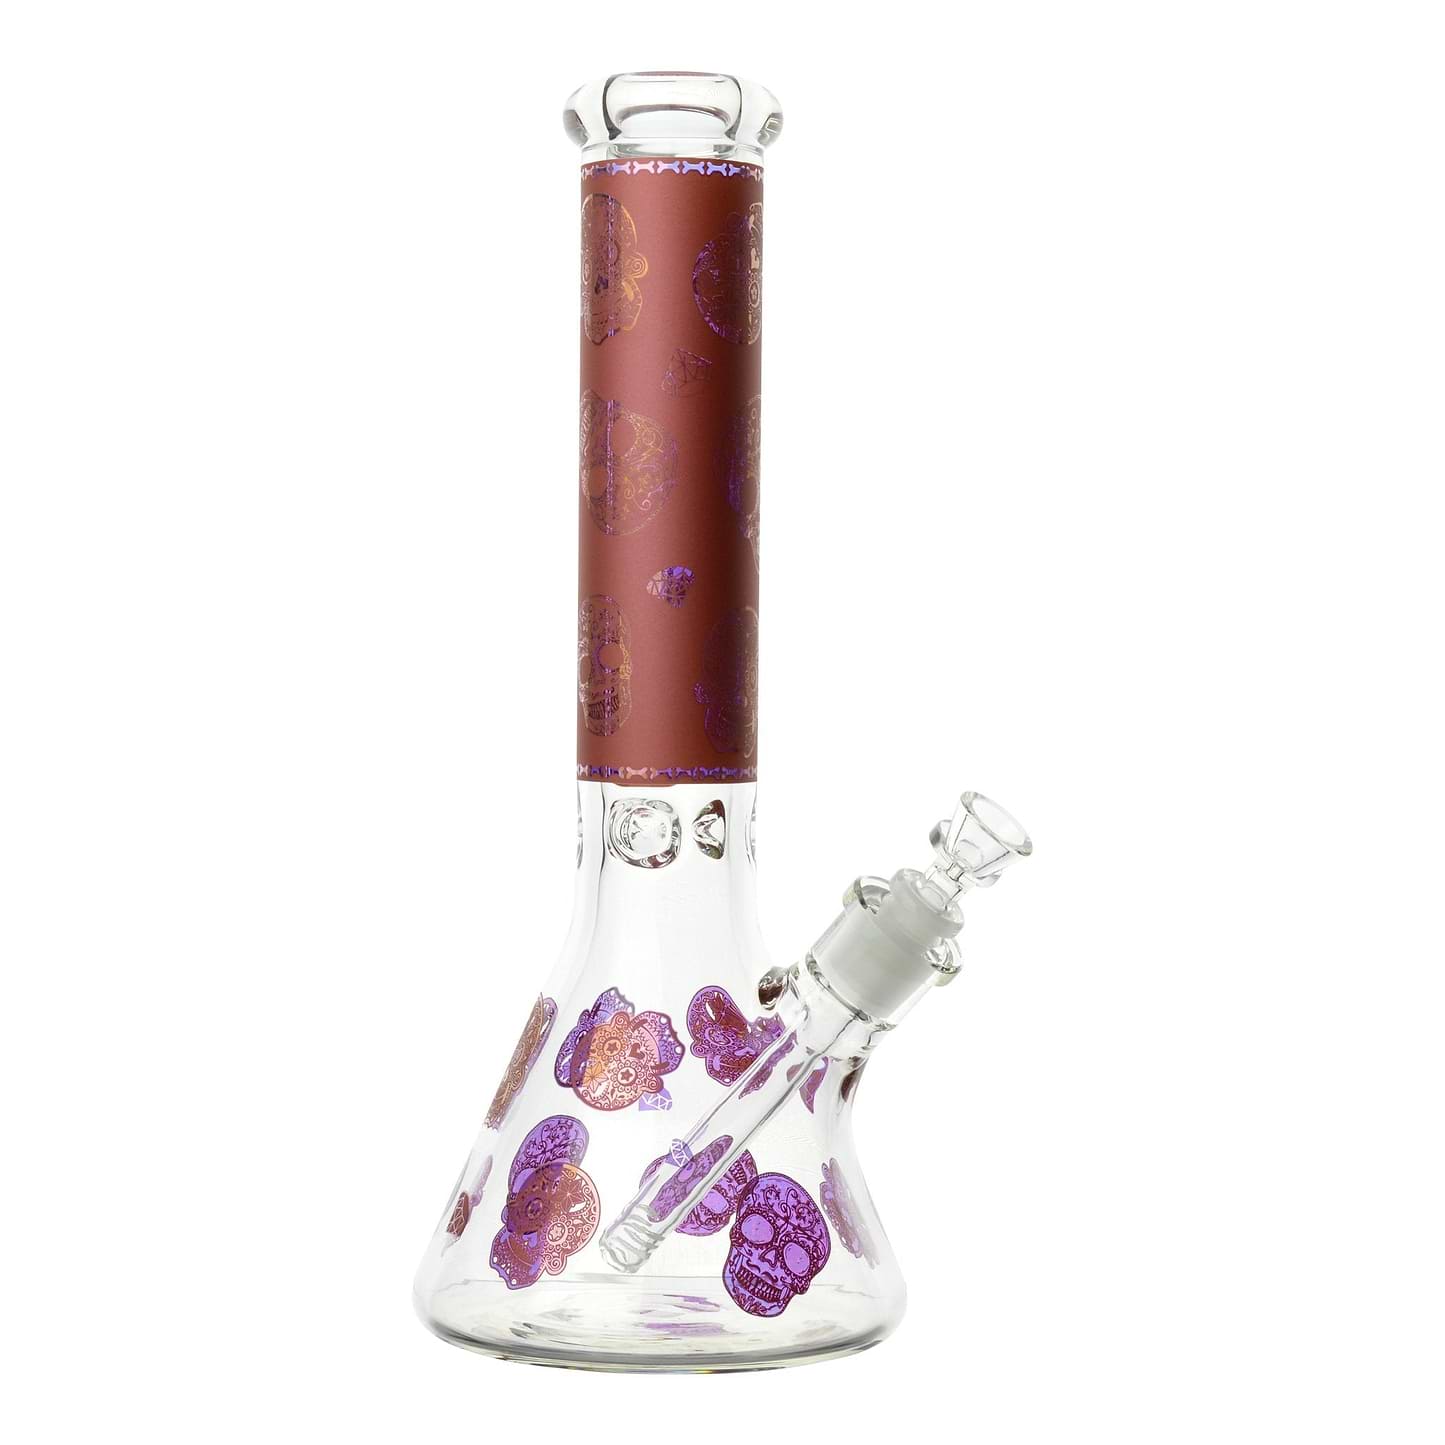 The Calavera Bong - 14in Red